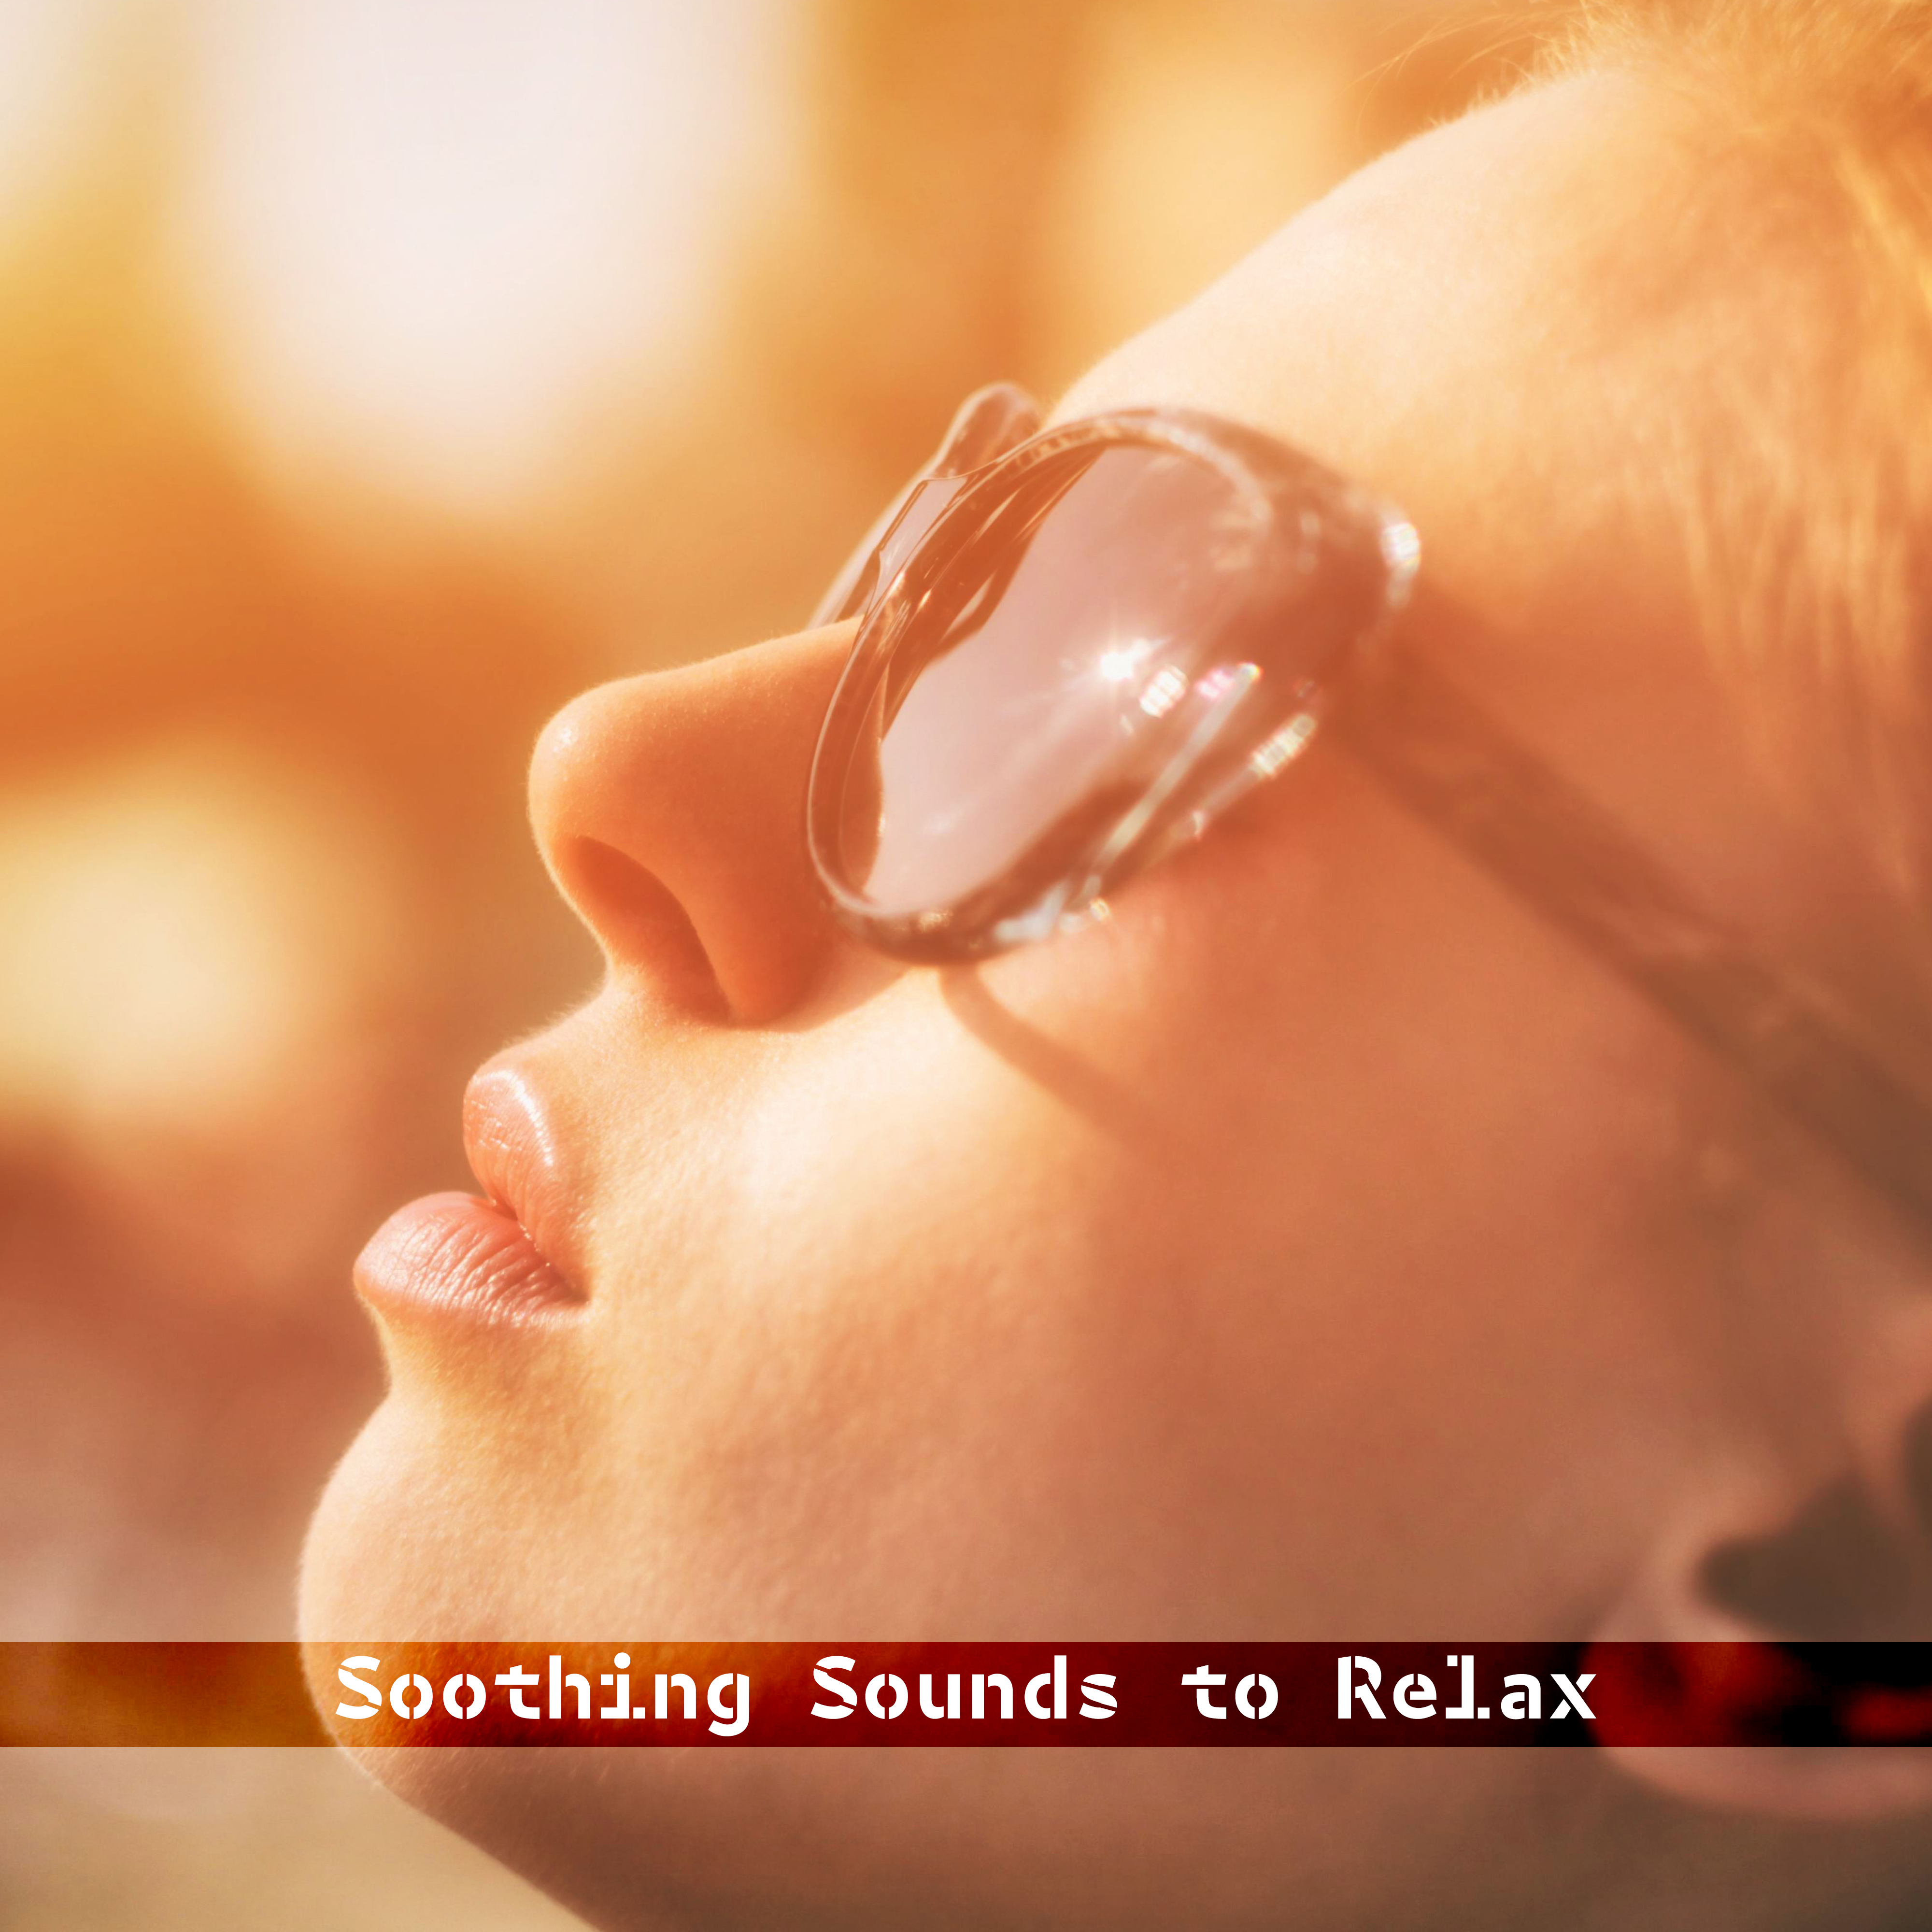 Soothing Sounds to Relax  New Age Relaxing Sounds, Time to Rest, Soft Music, Peaceful Sounds for Mind Calmness